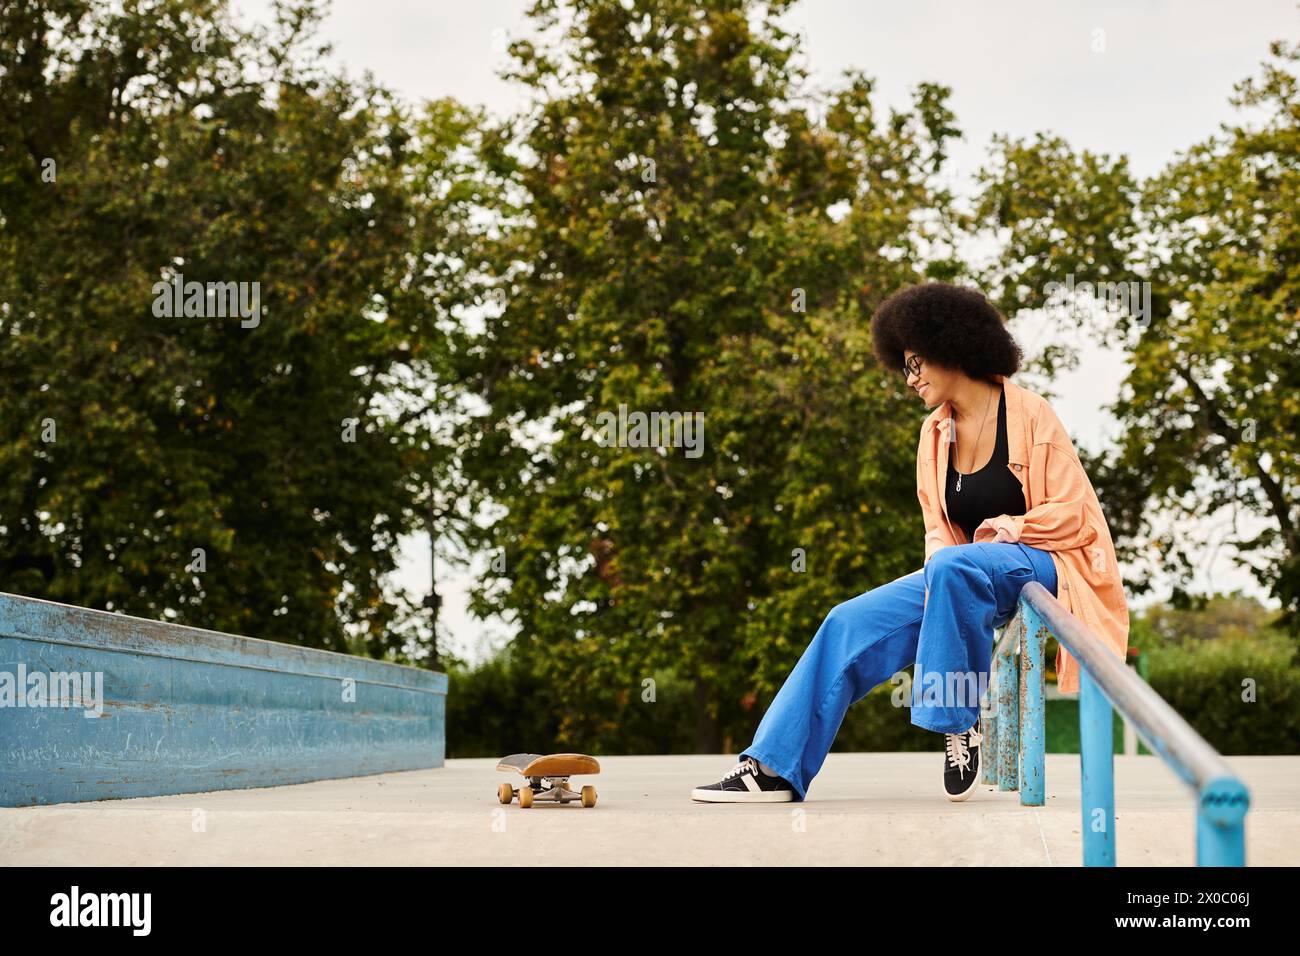 An African American woman with curly hair is sitting on a rail next to a skateboard in a skate park. Stock Photo